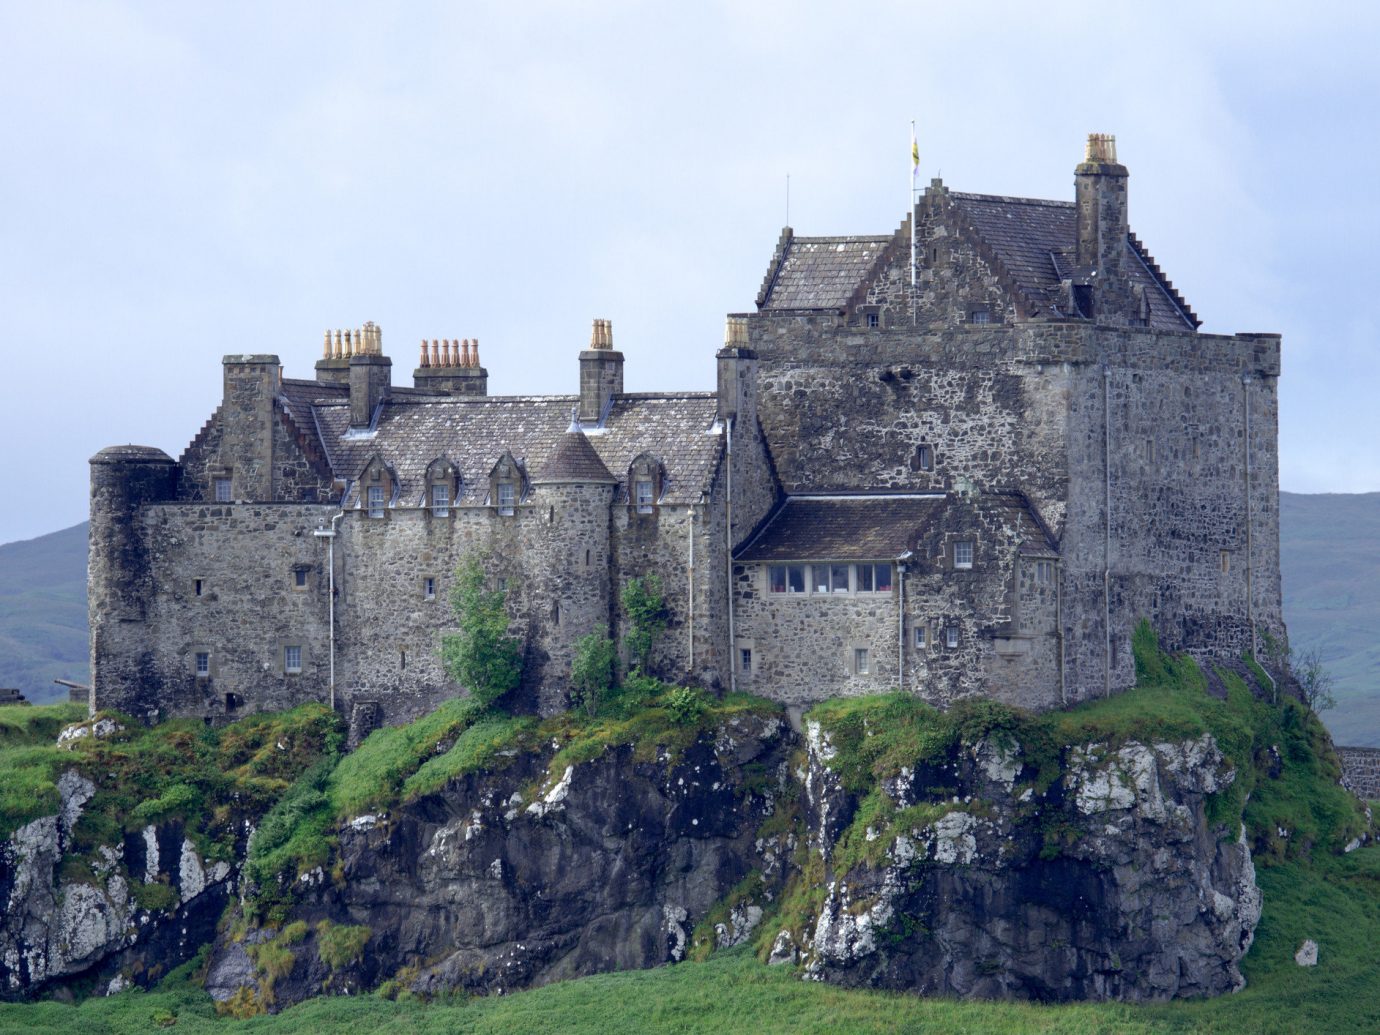 Landmarks Offbeat building grass sky outdoor castle rock château medieval architecture fortification highland stone old national trust for places of historic interest or natural beauty middle ages historic site Ruins stately home turret citadelle tours history grassy pasture hillside